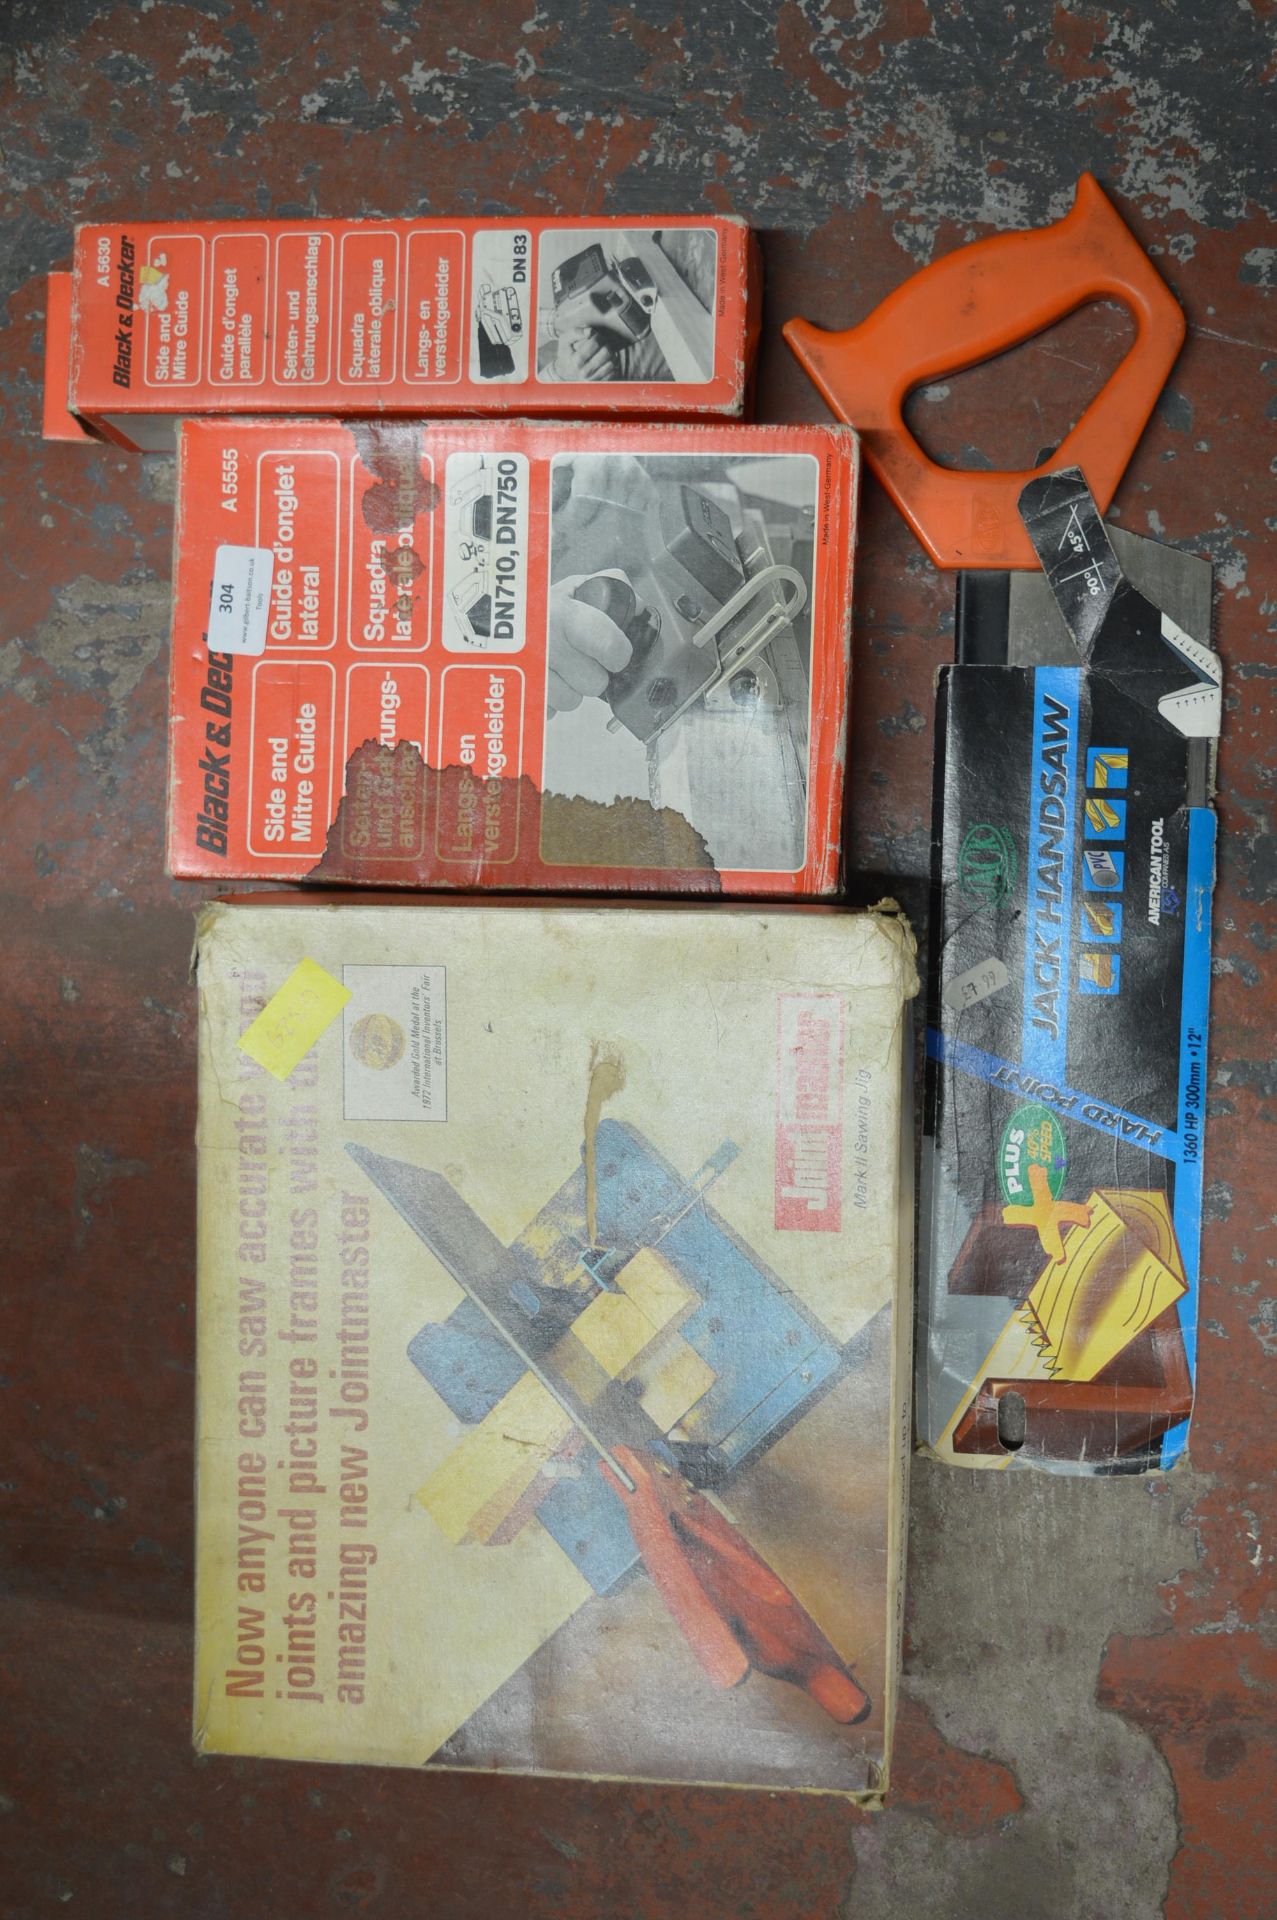 Mitre Saw and Mitre Guides